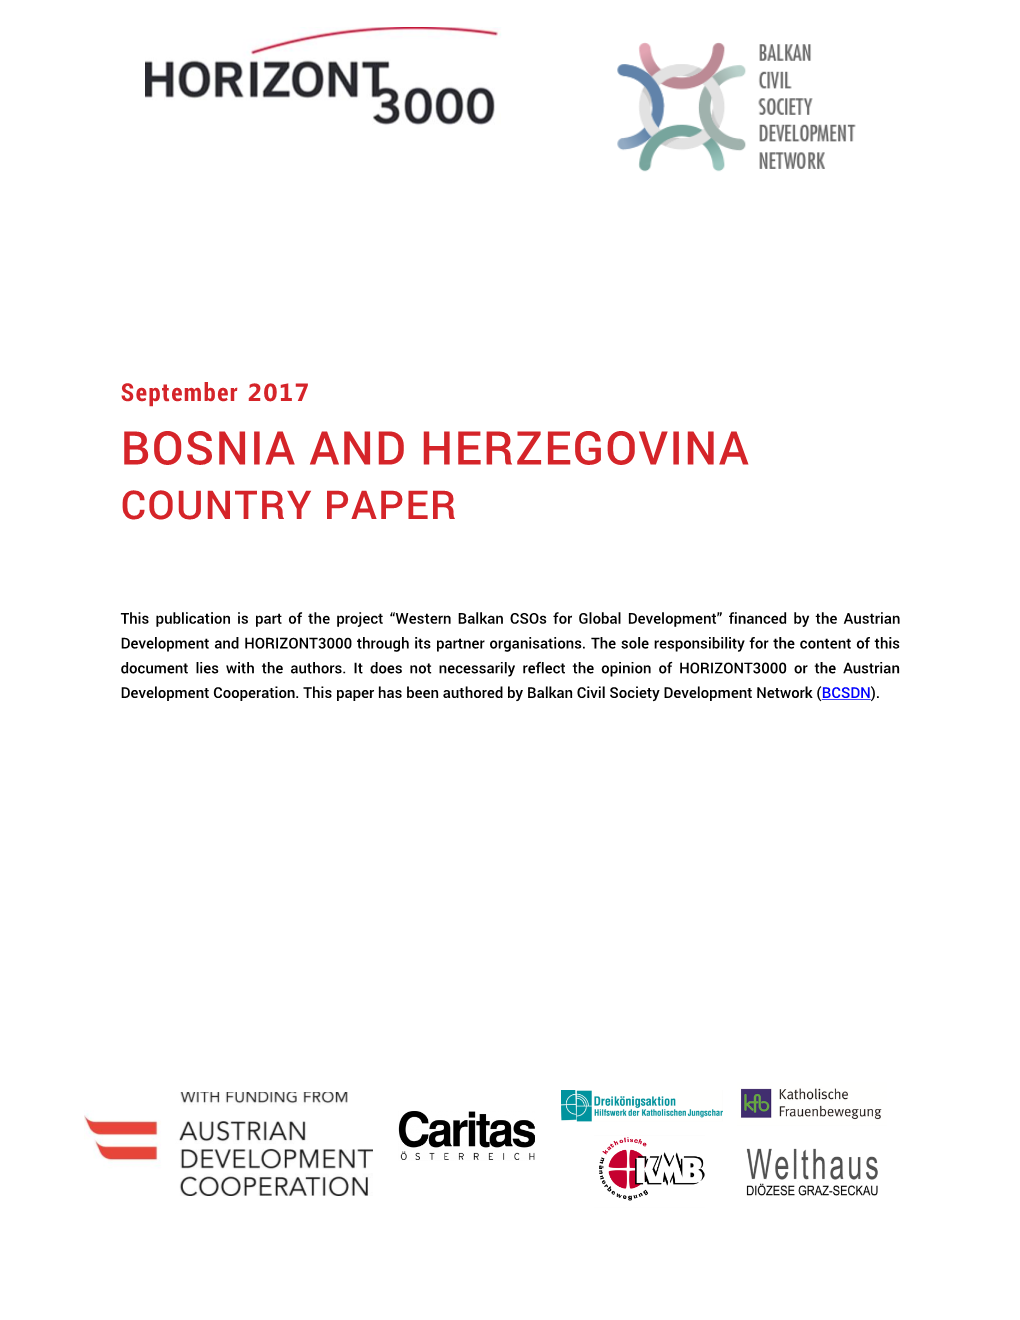 Bosnia and Herzegovina Country Paper